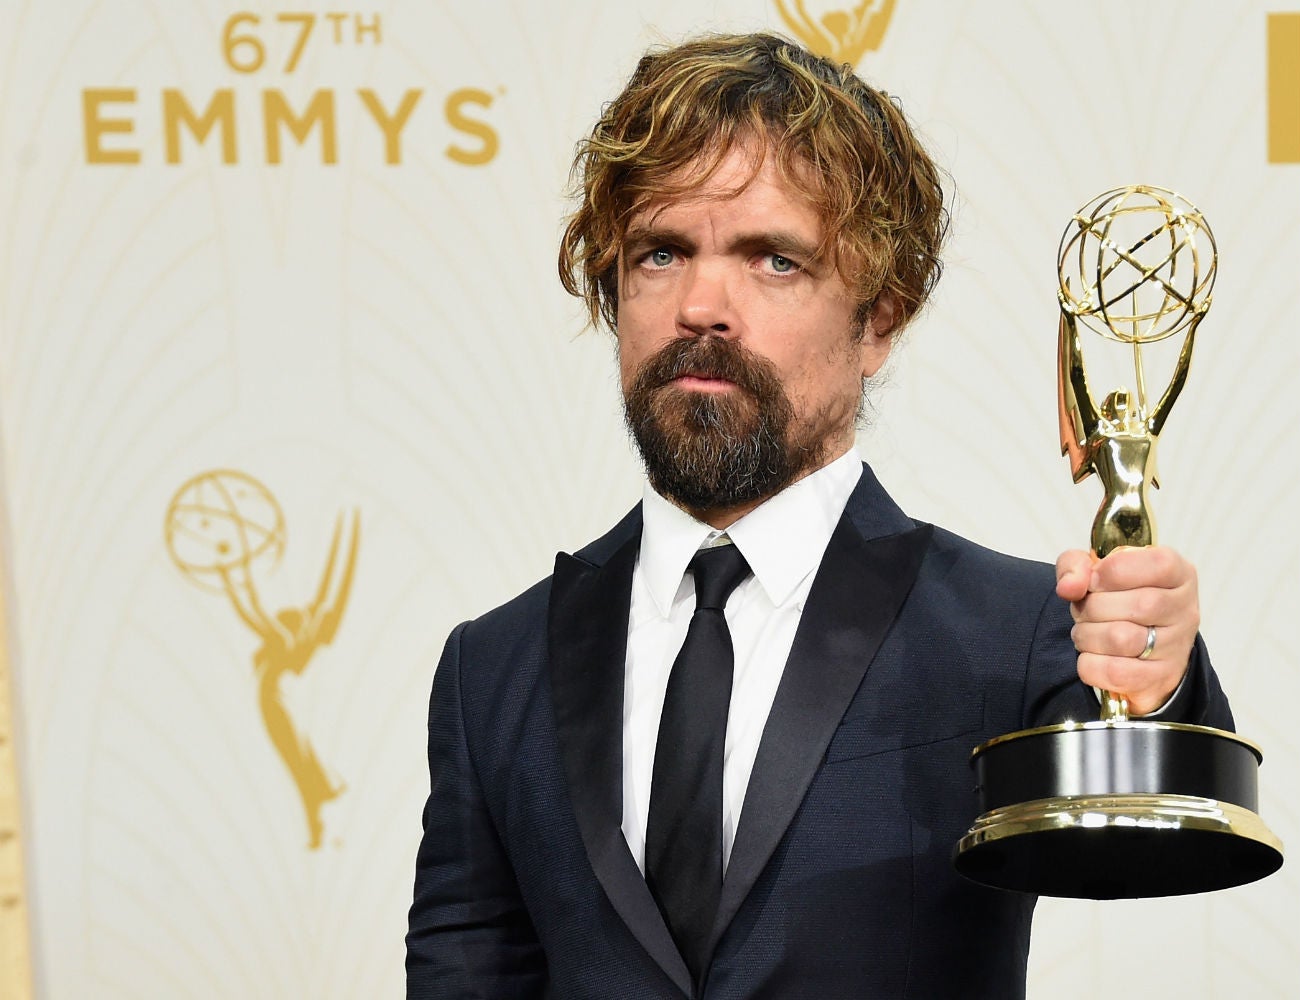 Peter Dinklage, the star of Game of Thrones, has described jokes about people with dwarfism as "one of the last bastions of acceptable prejudice".